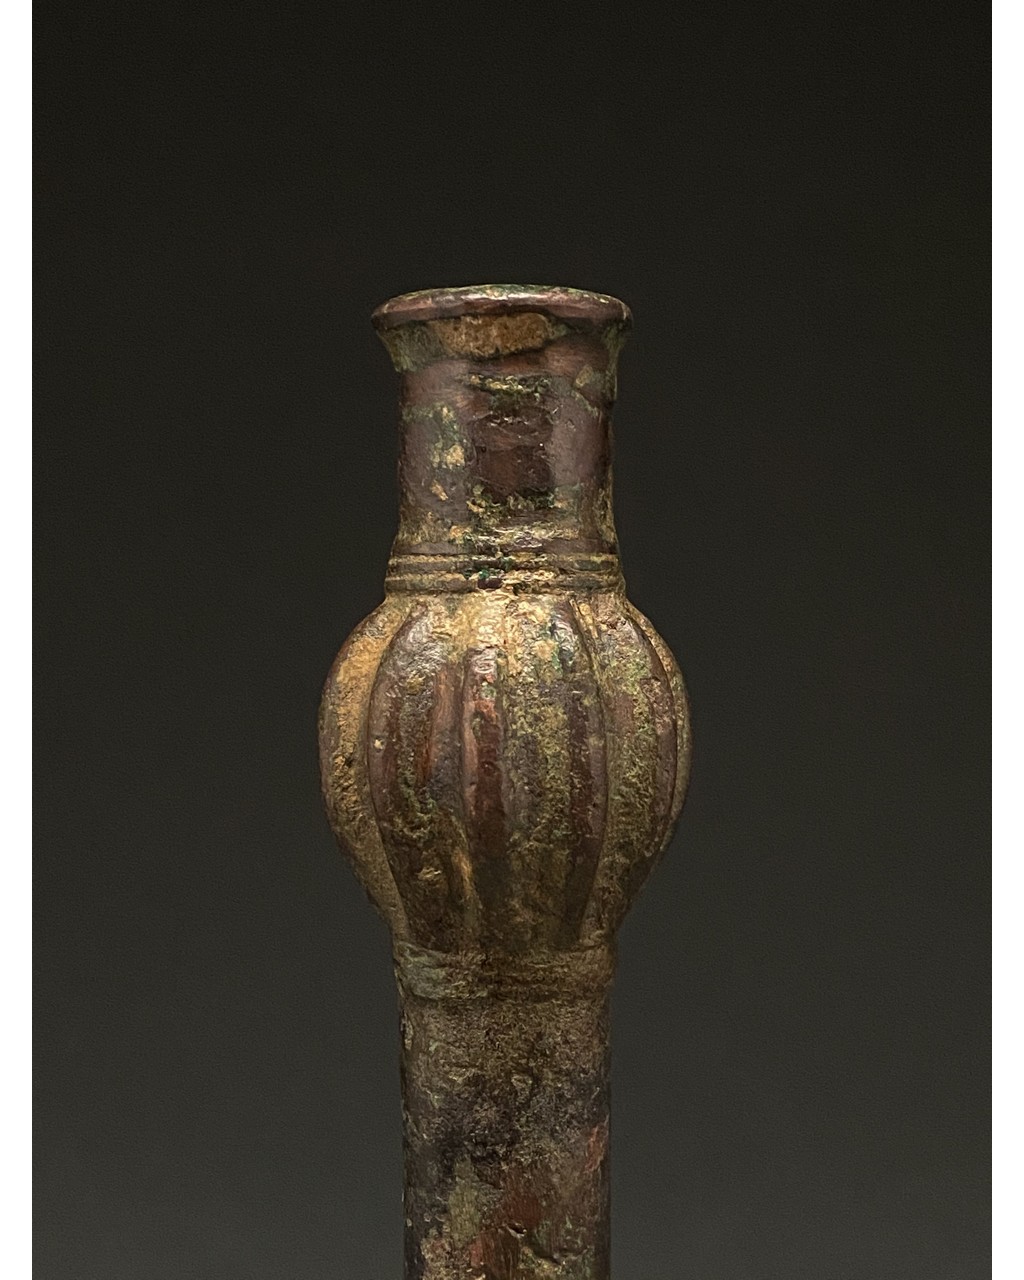 BRONZE AGE DECORATED MACE HEAD ON STAND - Image 2 of 6